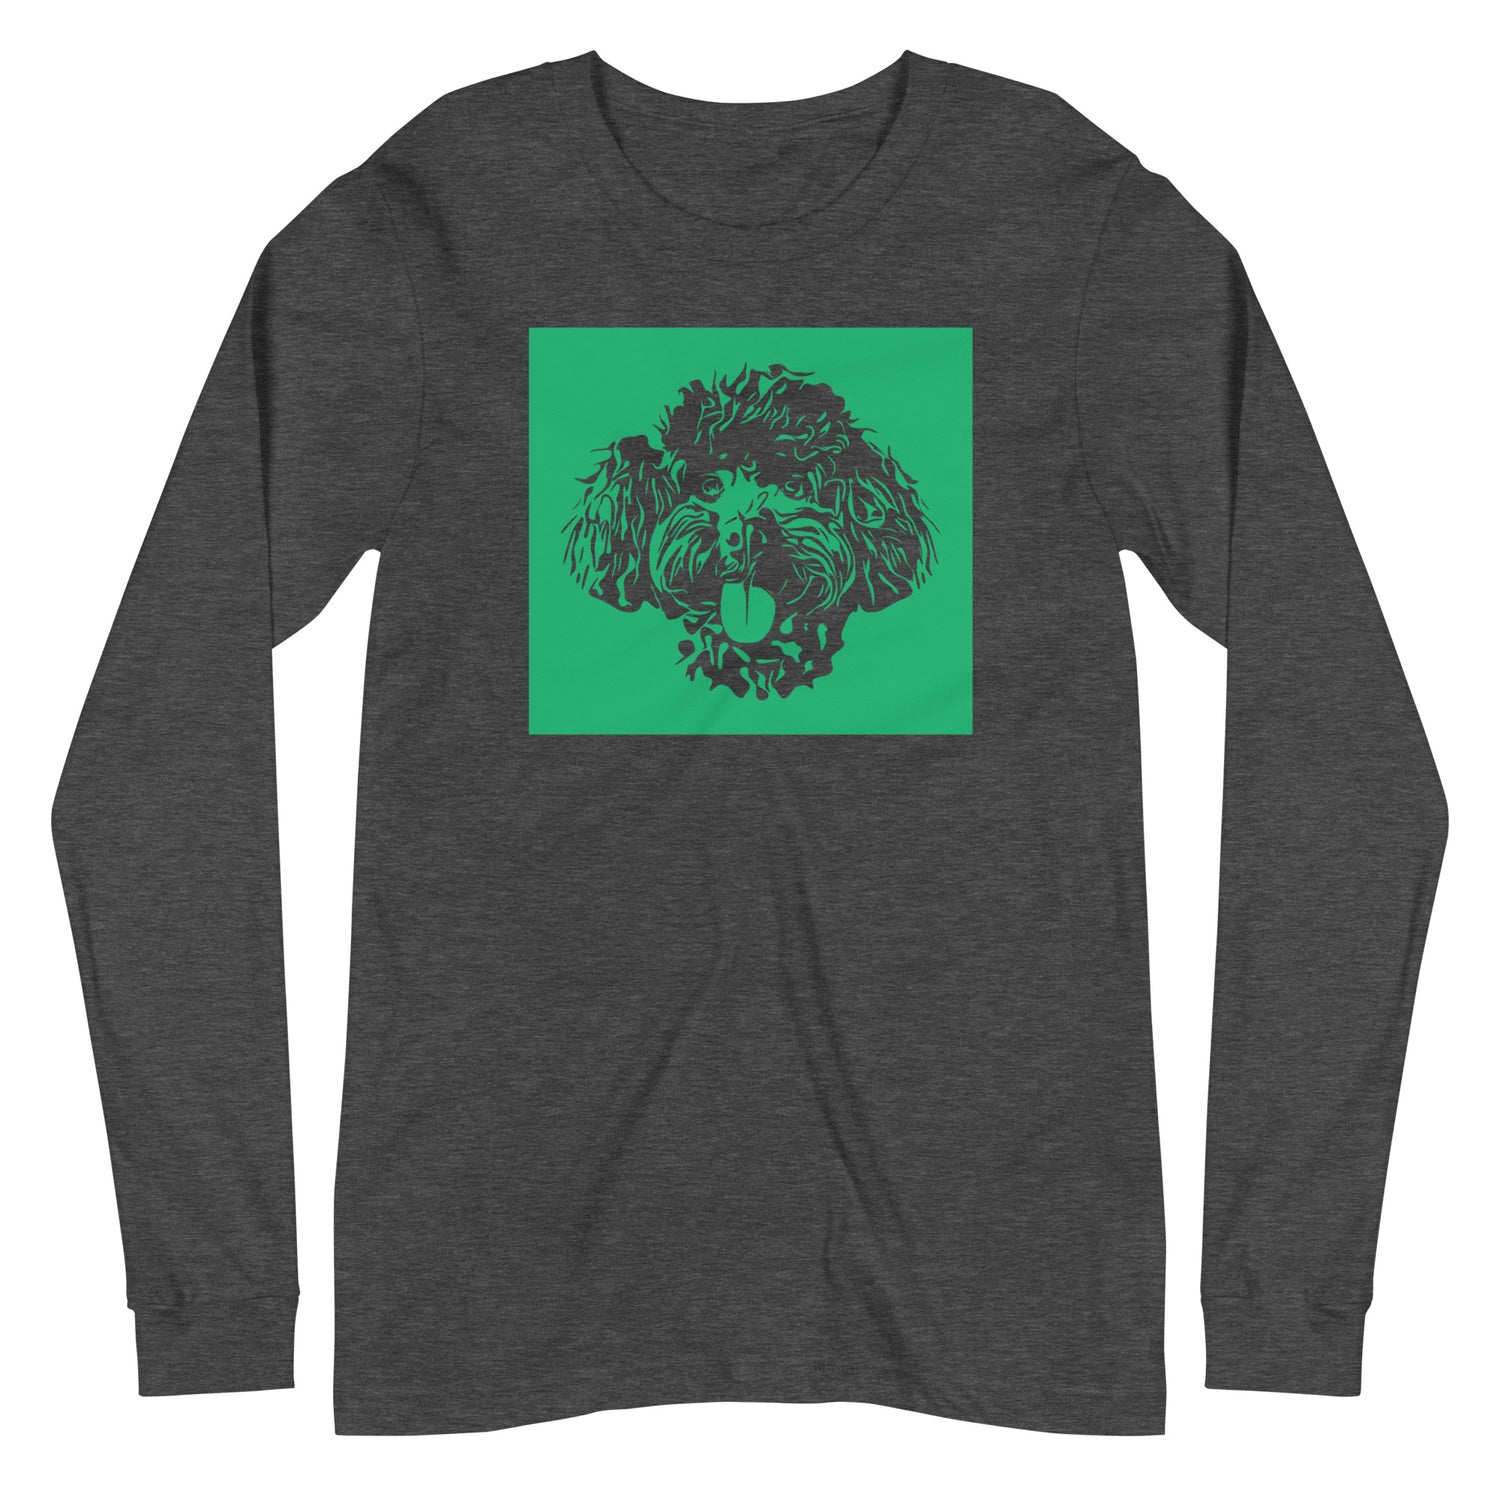 Toy Poodle face Silhouette with green background square on unisex dark grey heather long sleeve t-shirt